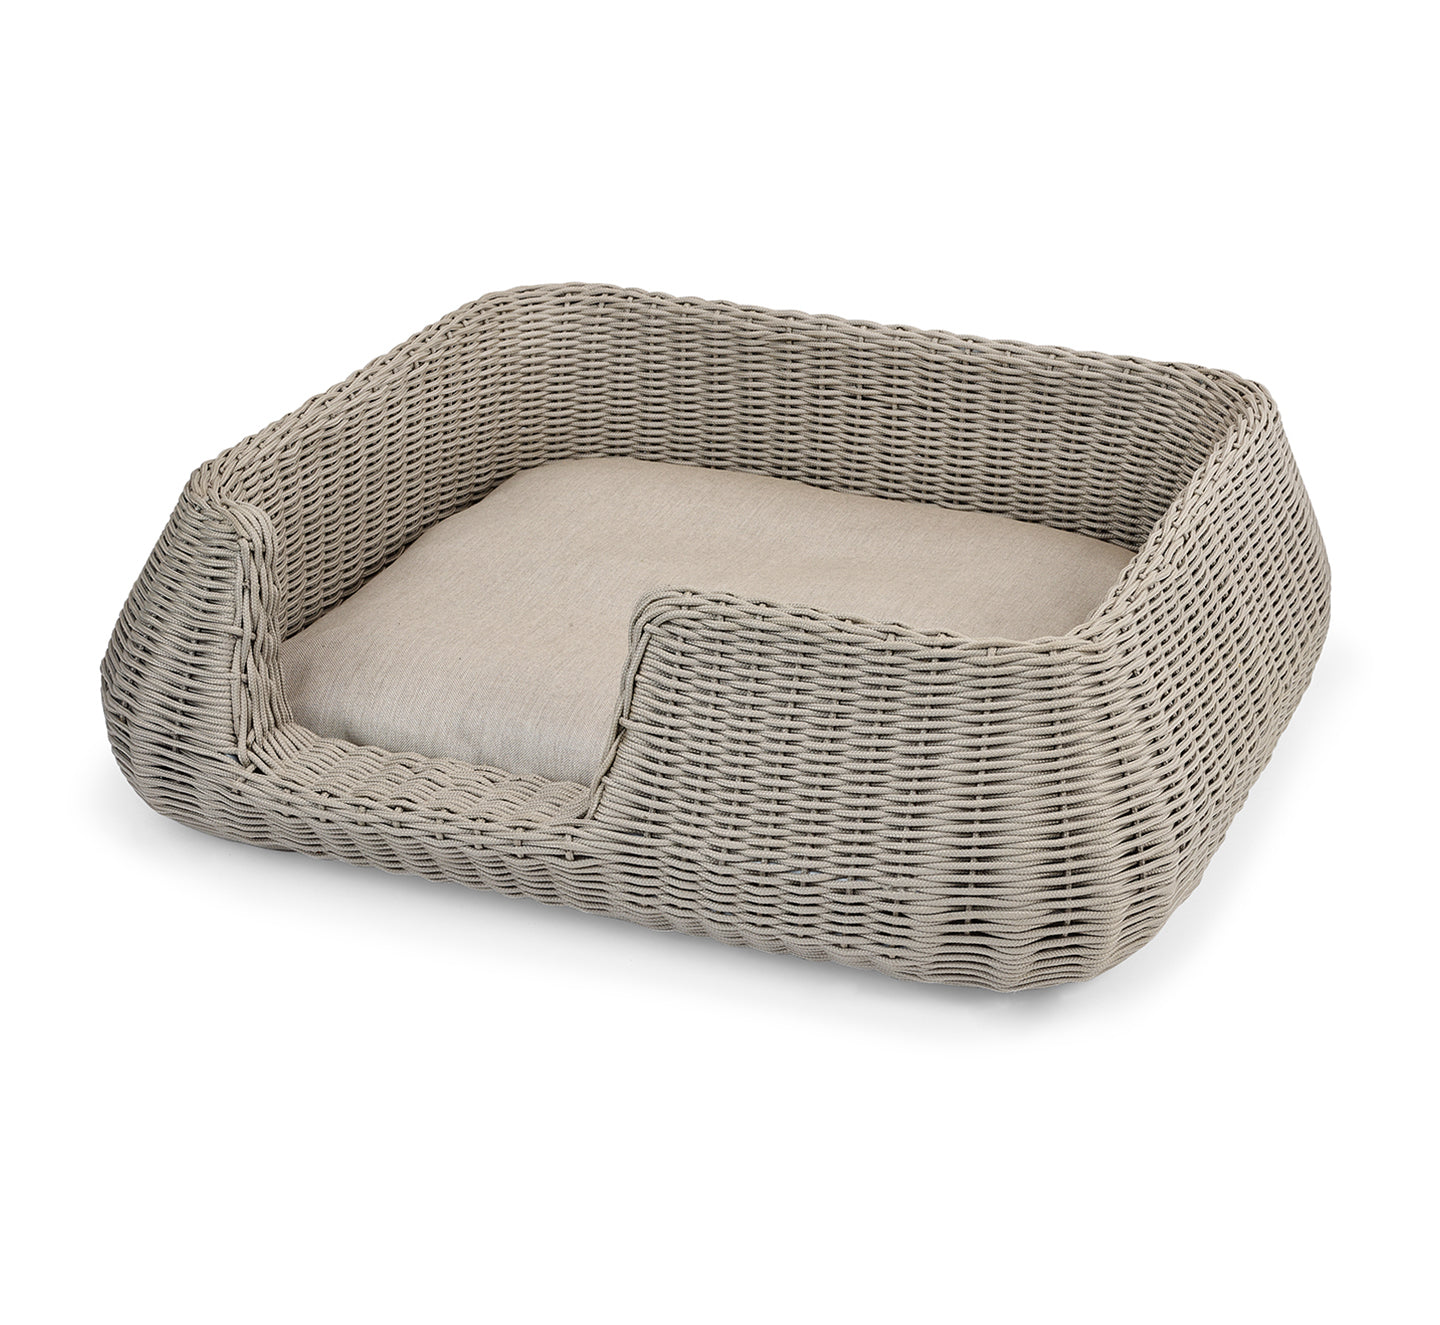 Browse All Dog Bed Products